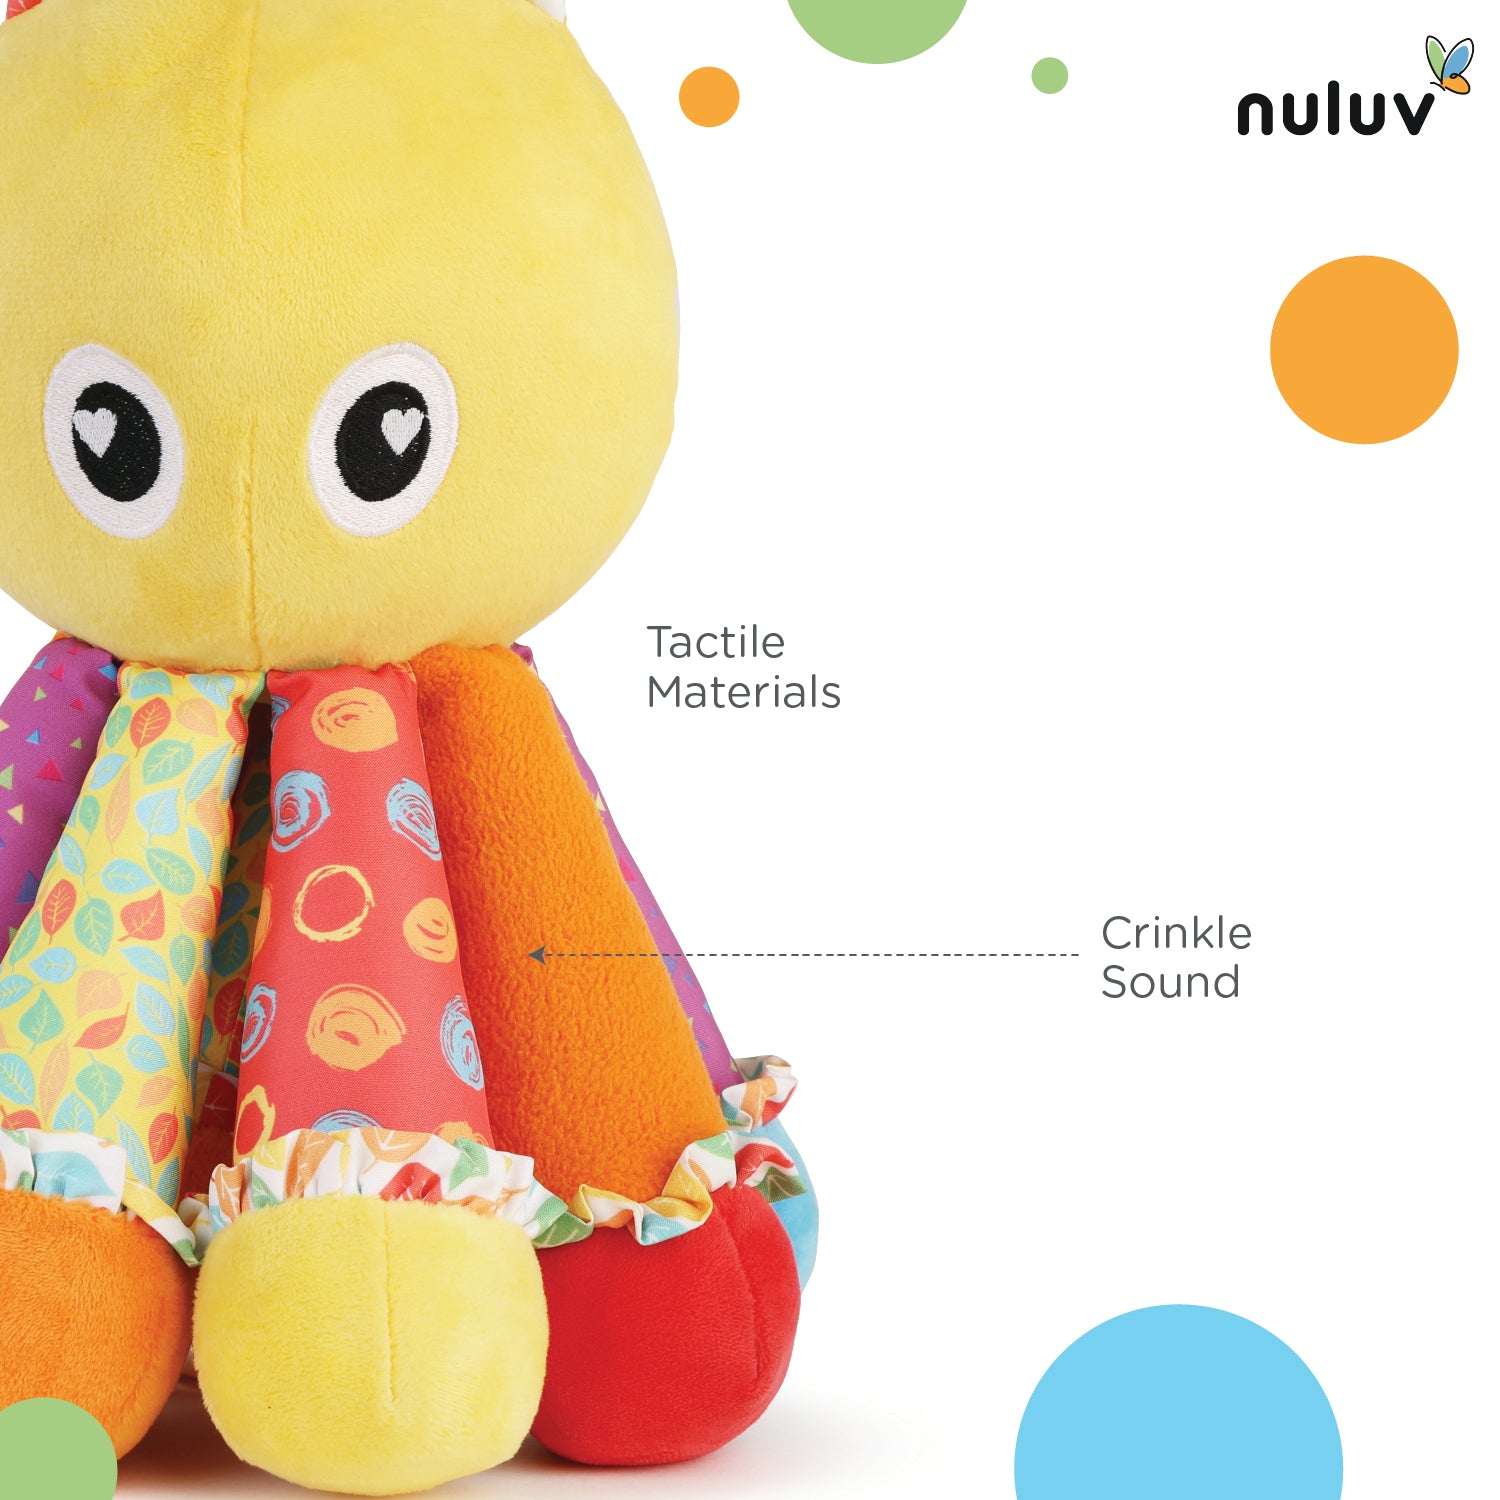 Nuluv Activity Octopus Soft Toy With Crinkle Sound Rattle For Baby 3 Months+